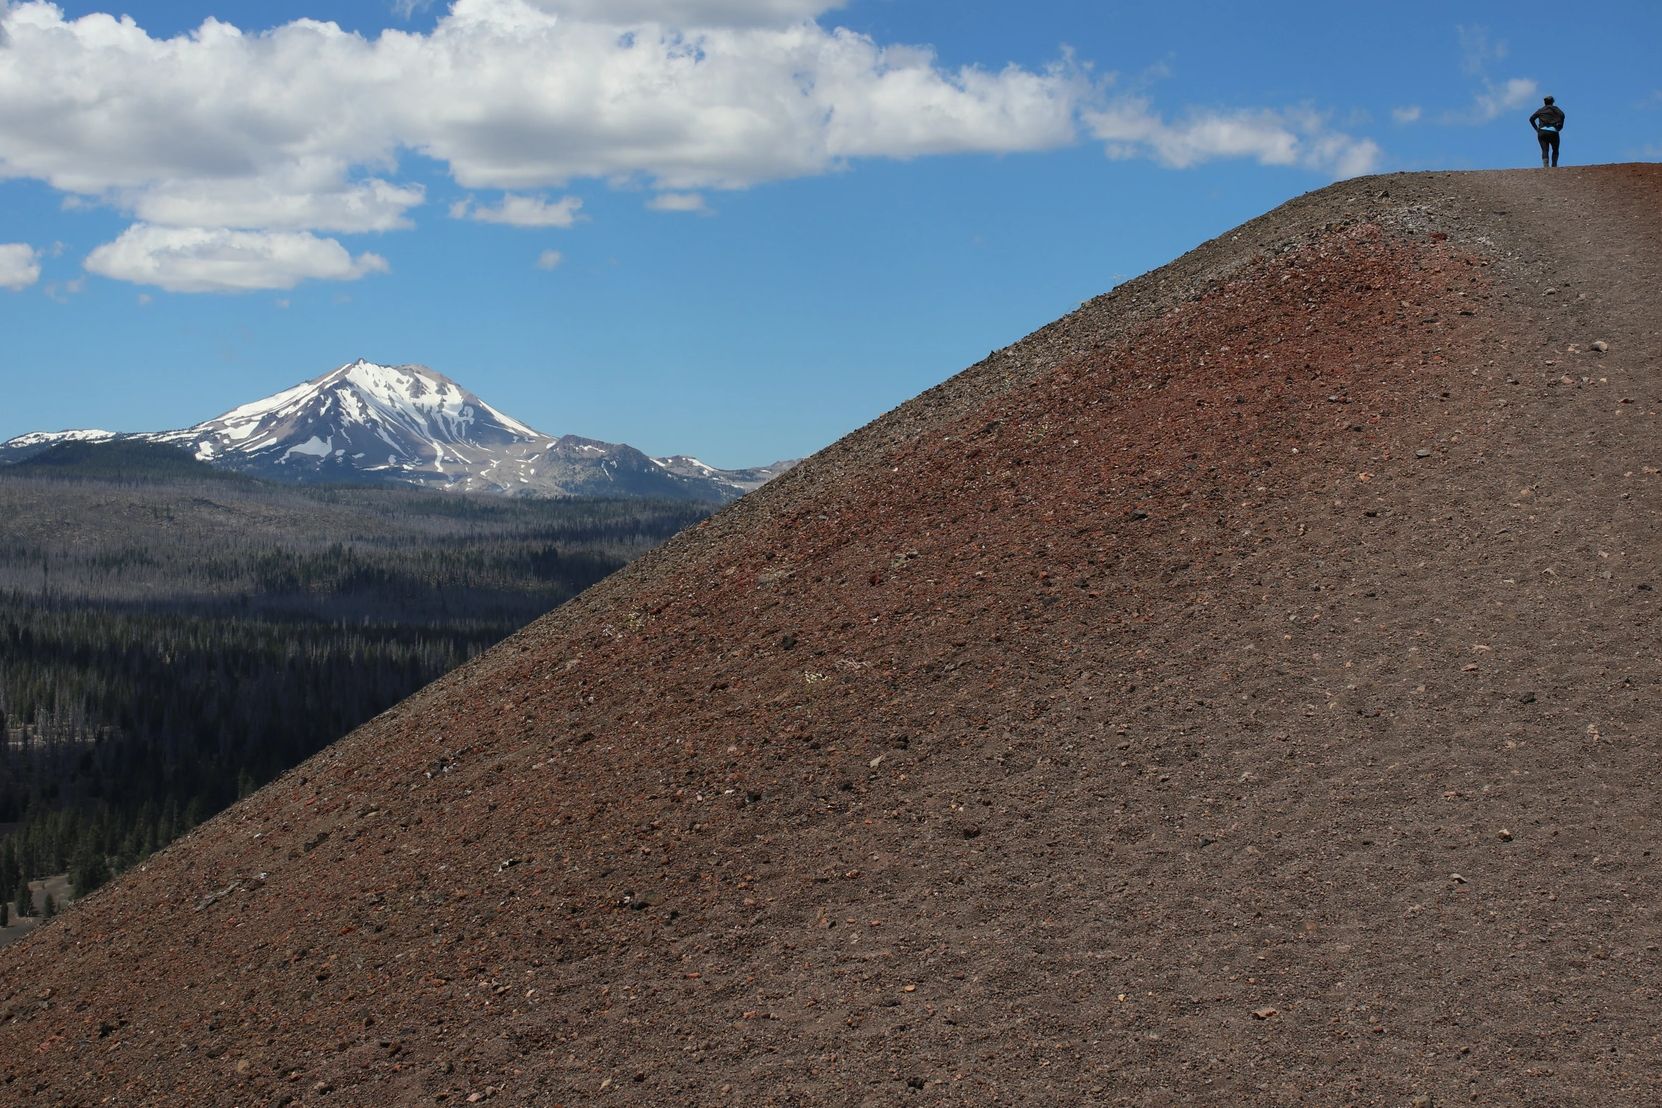 A lone hiker summits the cinder cone to overlook Mt. Lassen.  ~photo by Timbre Beck, rights reserved